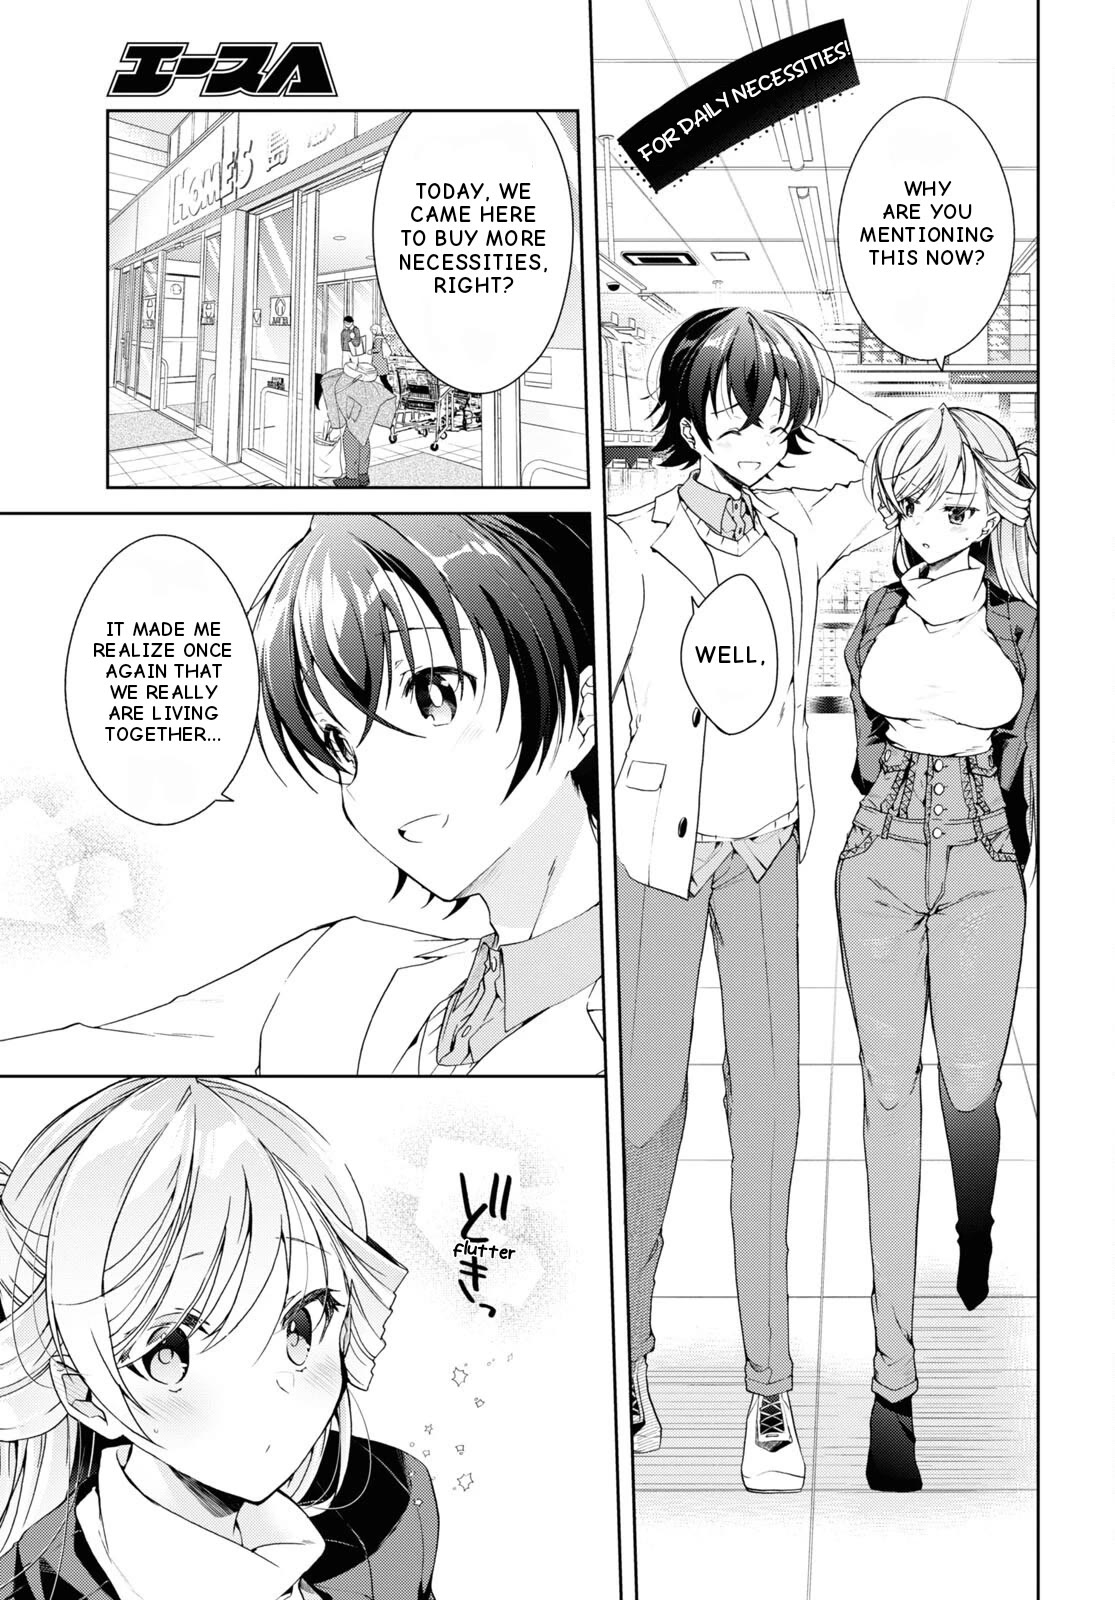 Isshiki-san Wants to Know About Love. - chapter 26 - #6